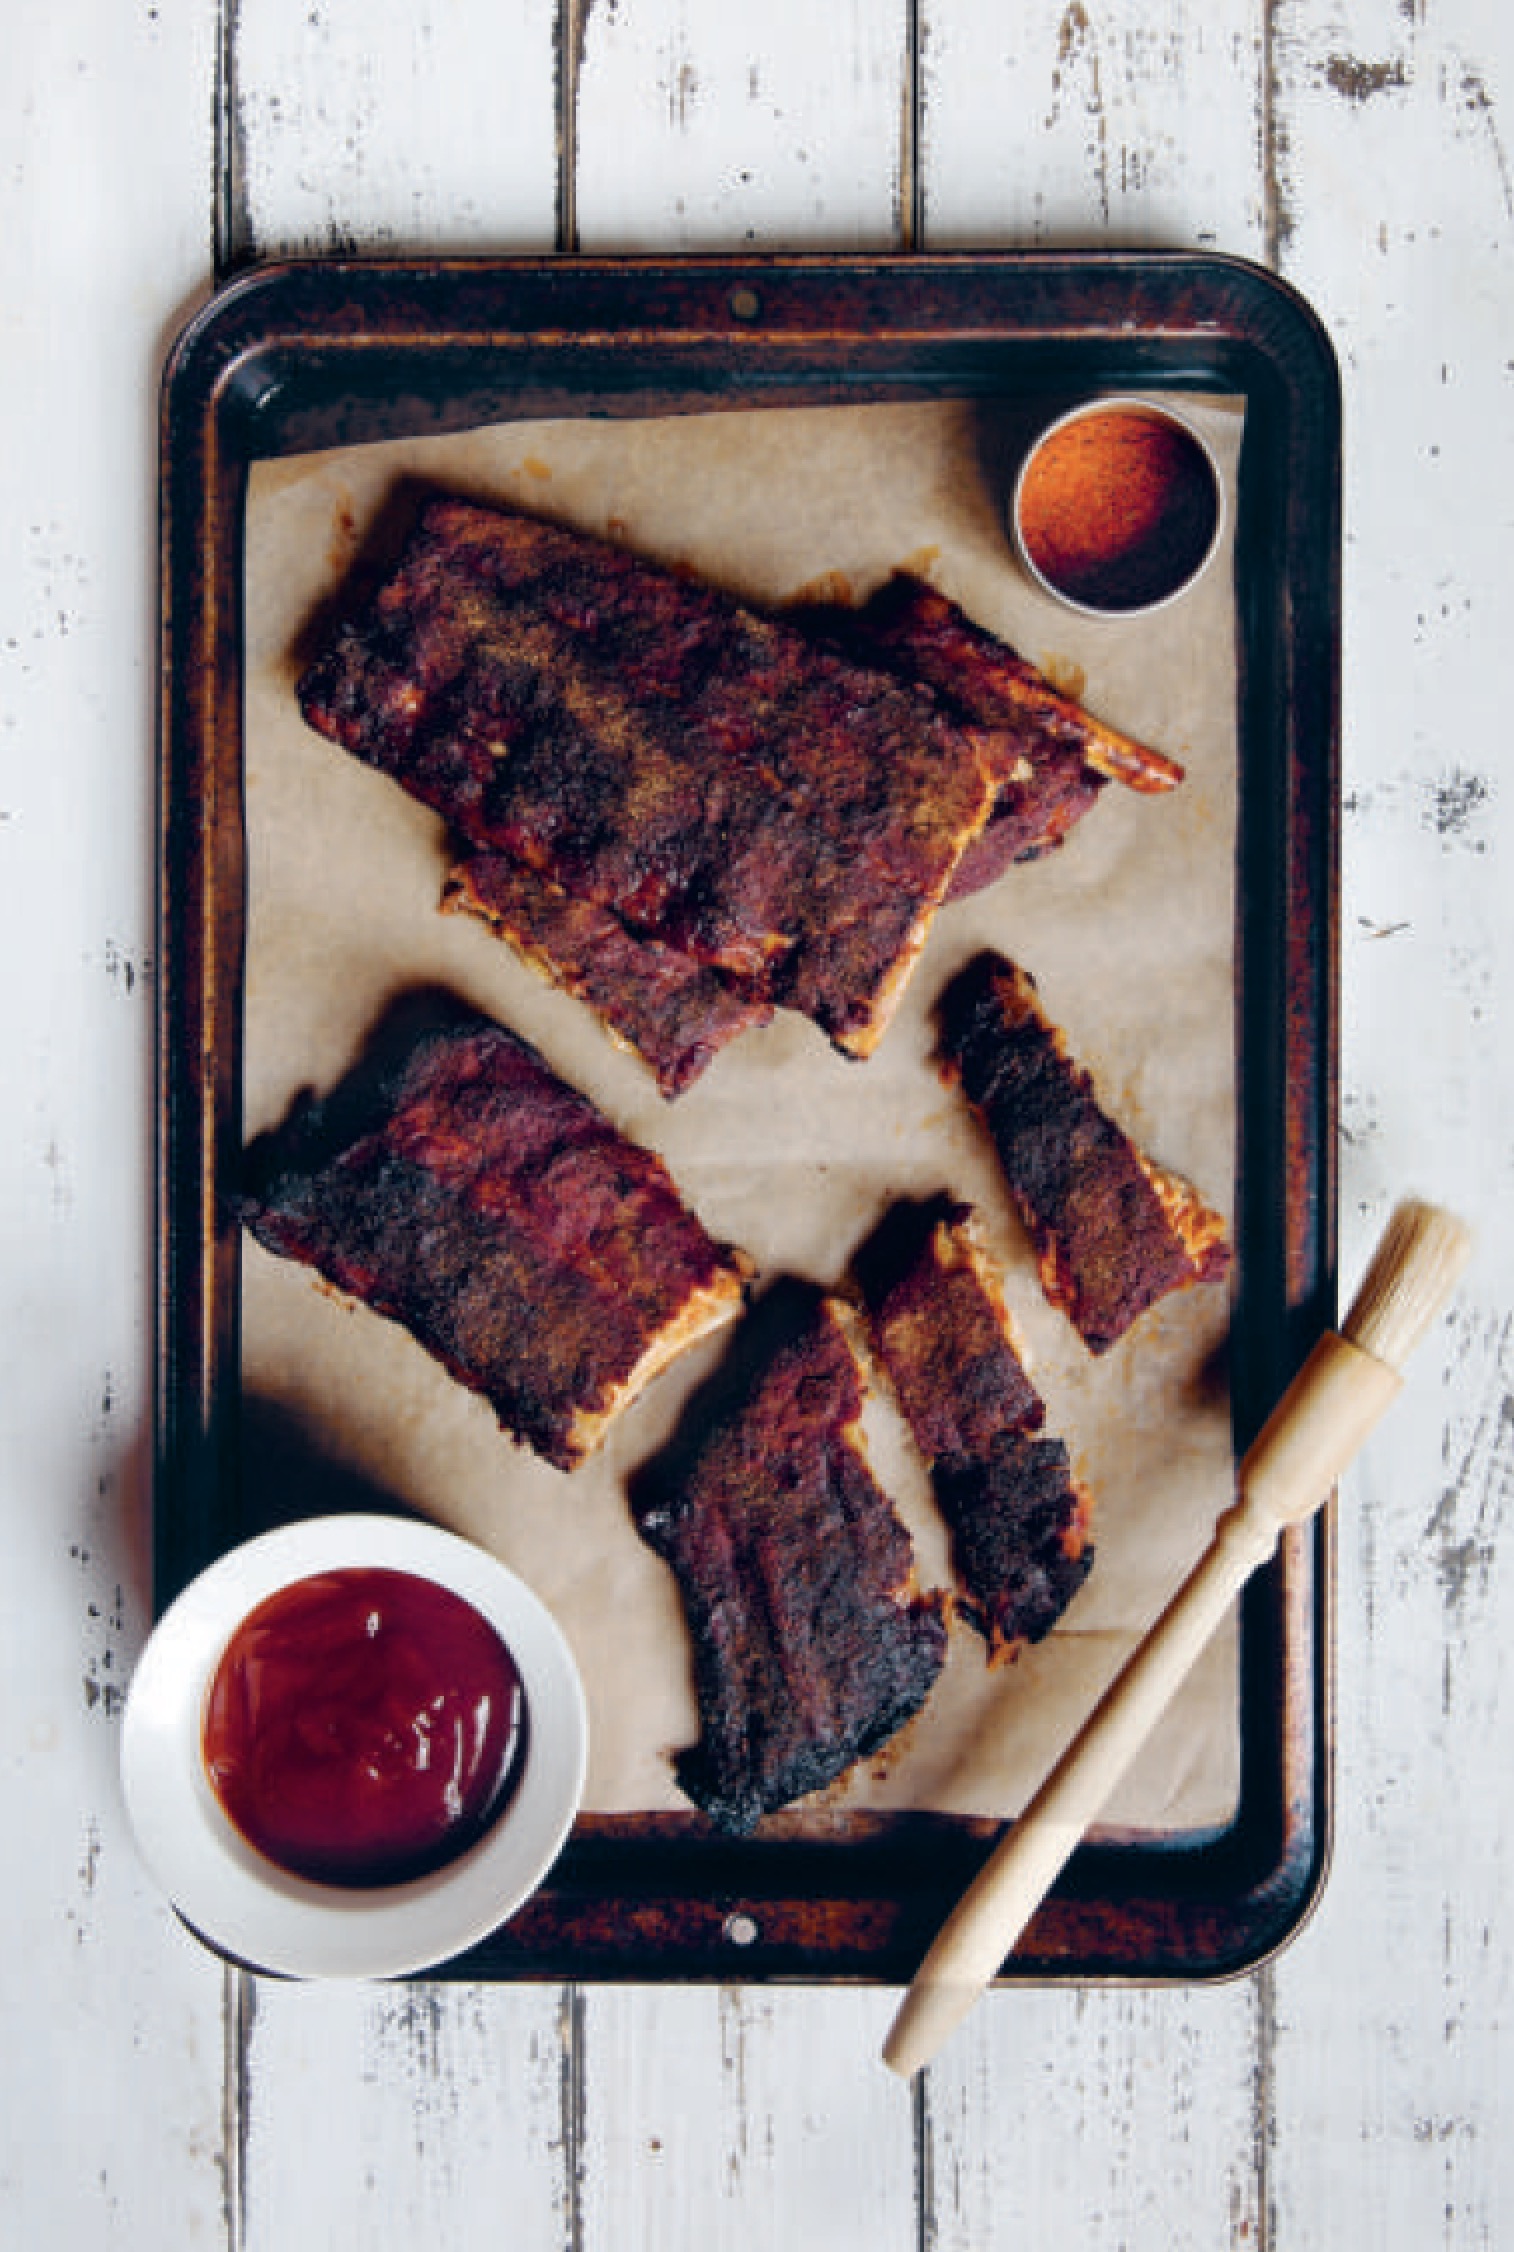 Memphis Style Barbecued Pork Ribs - from America the Cookbook